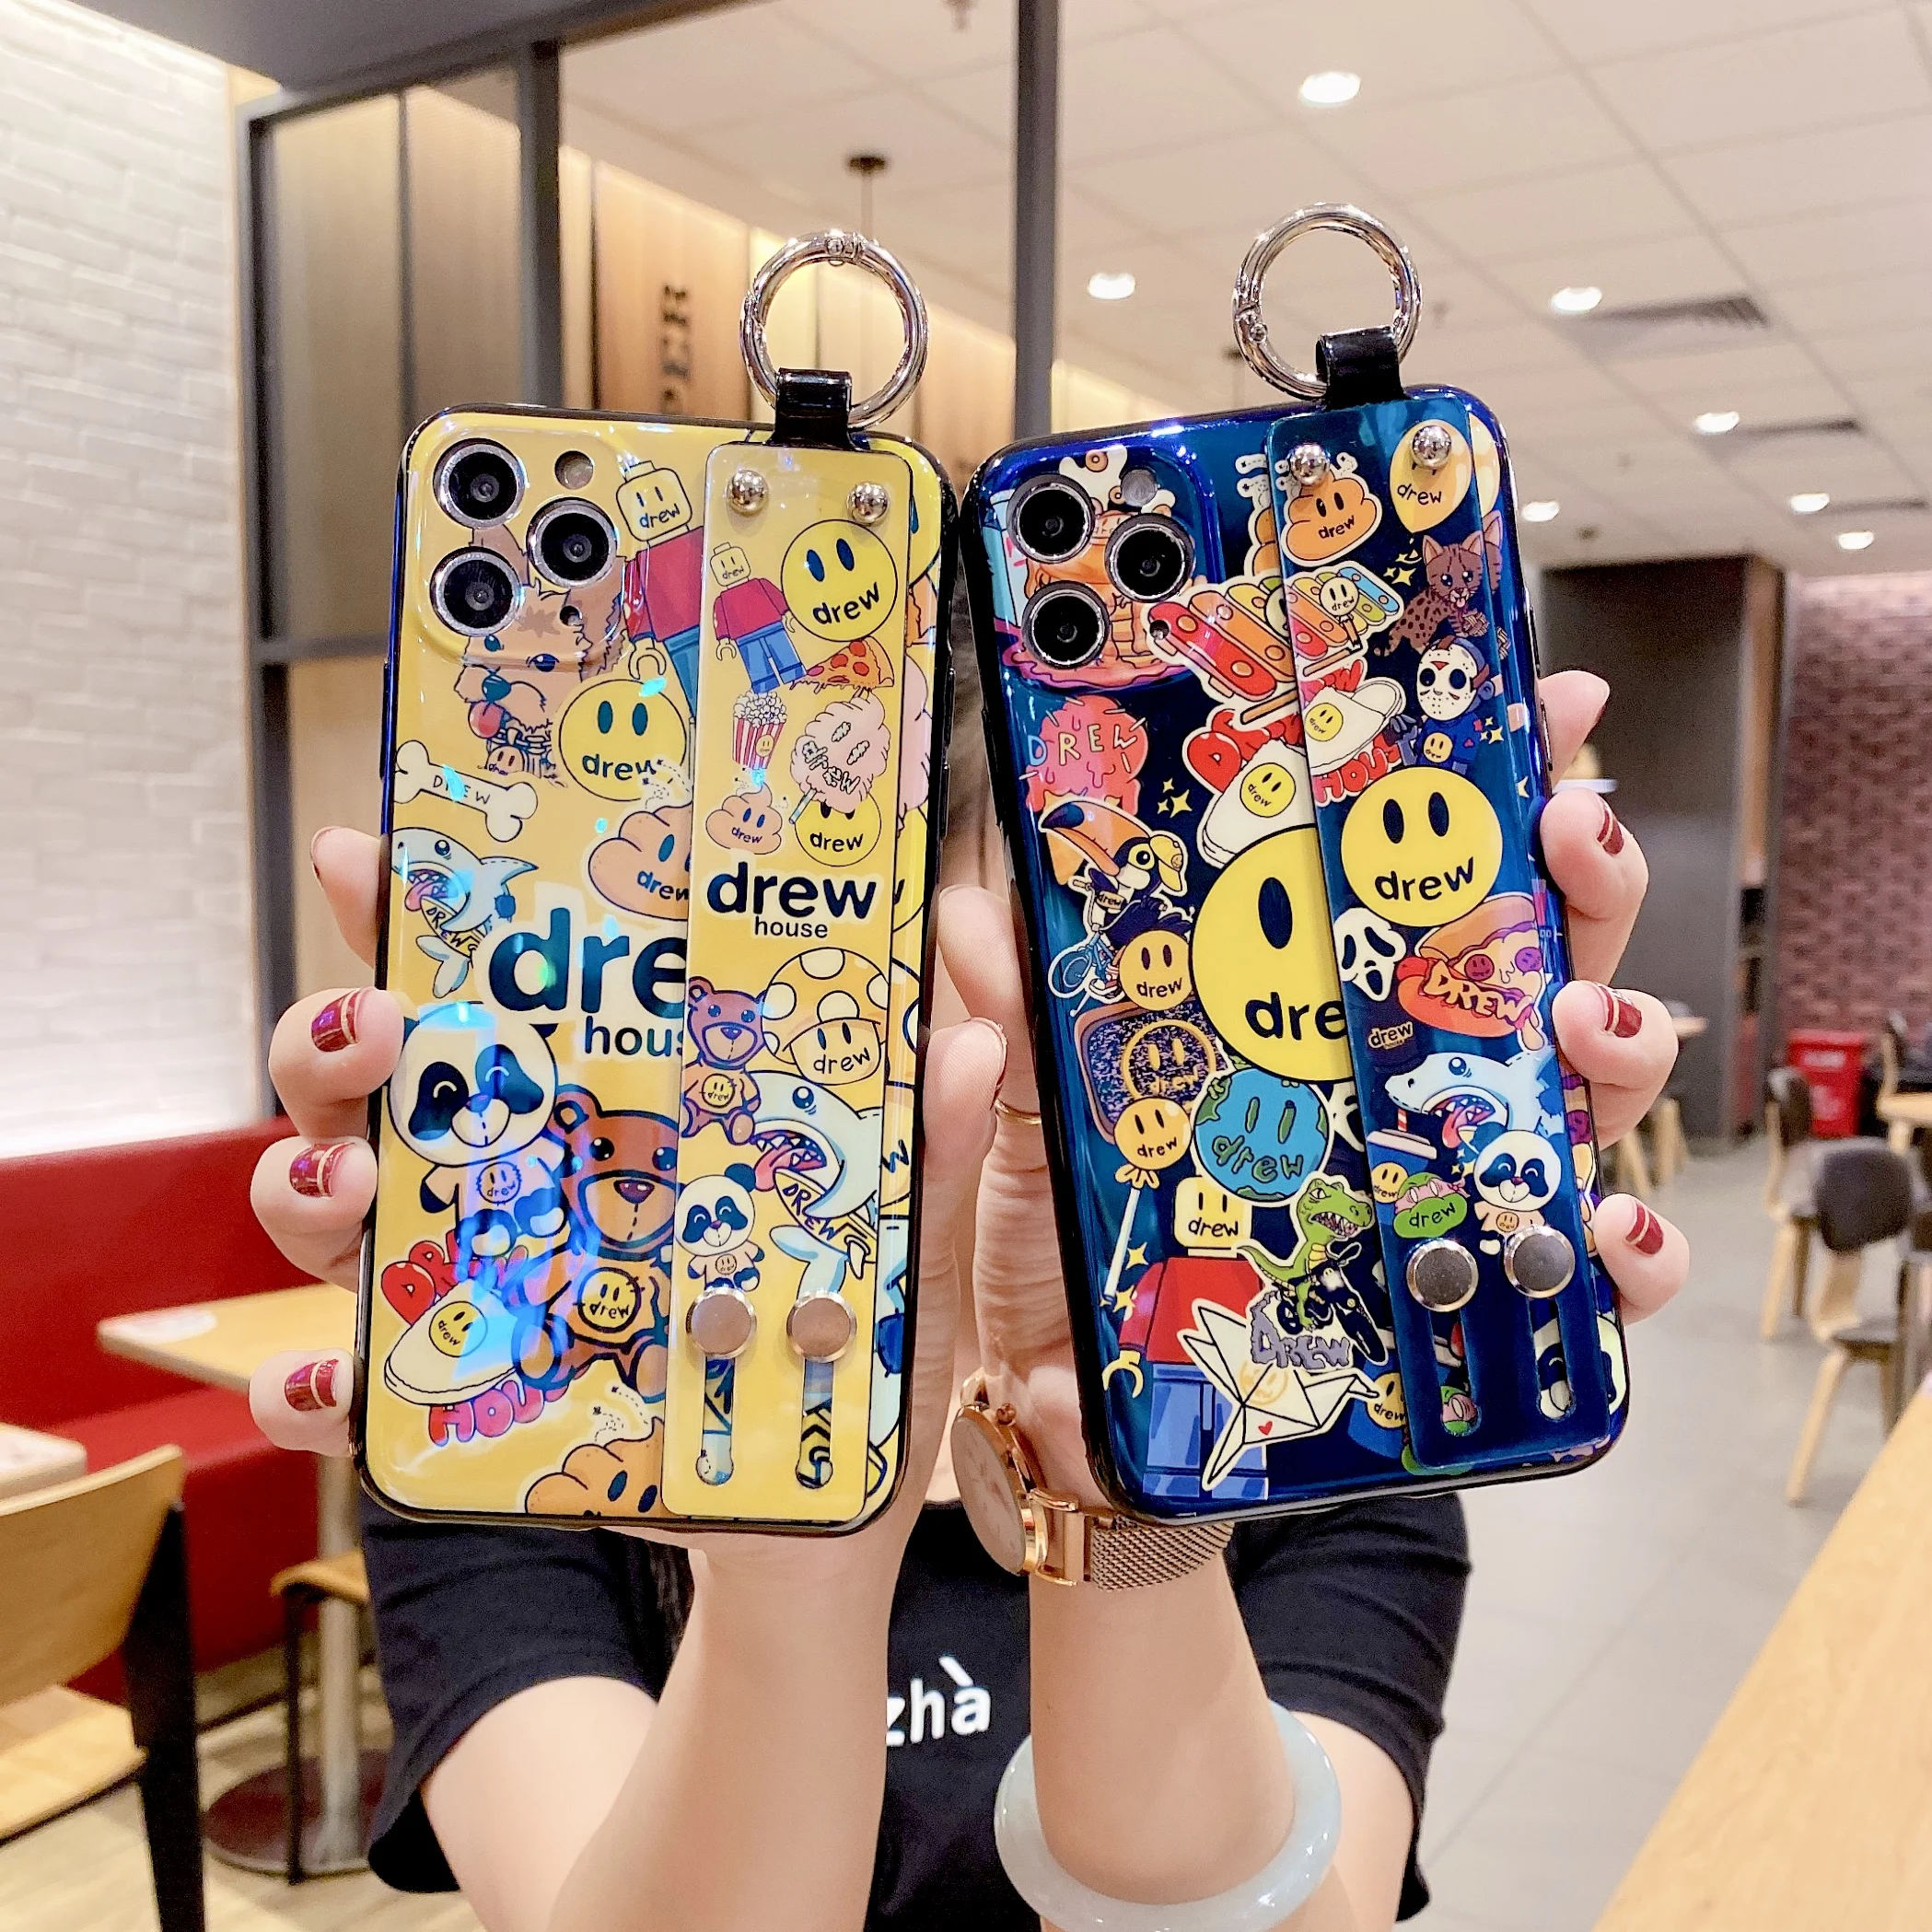 

Blue Ray Cartoon Phone Cover For Huawei Y5p Y6p Y7P Y7A Y8P Y8S Y9A Mate 40 Pro Nova 8 SE 9A 9C 9S 9X Pro Silicone Soft TPU Case